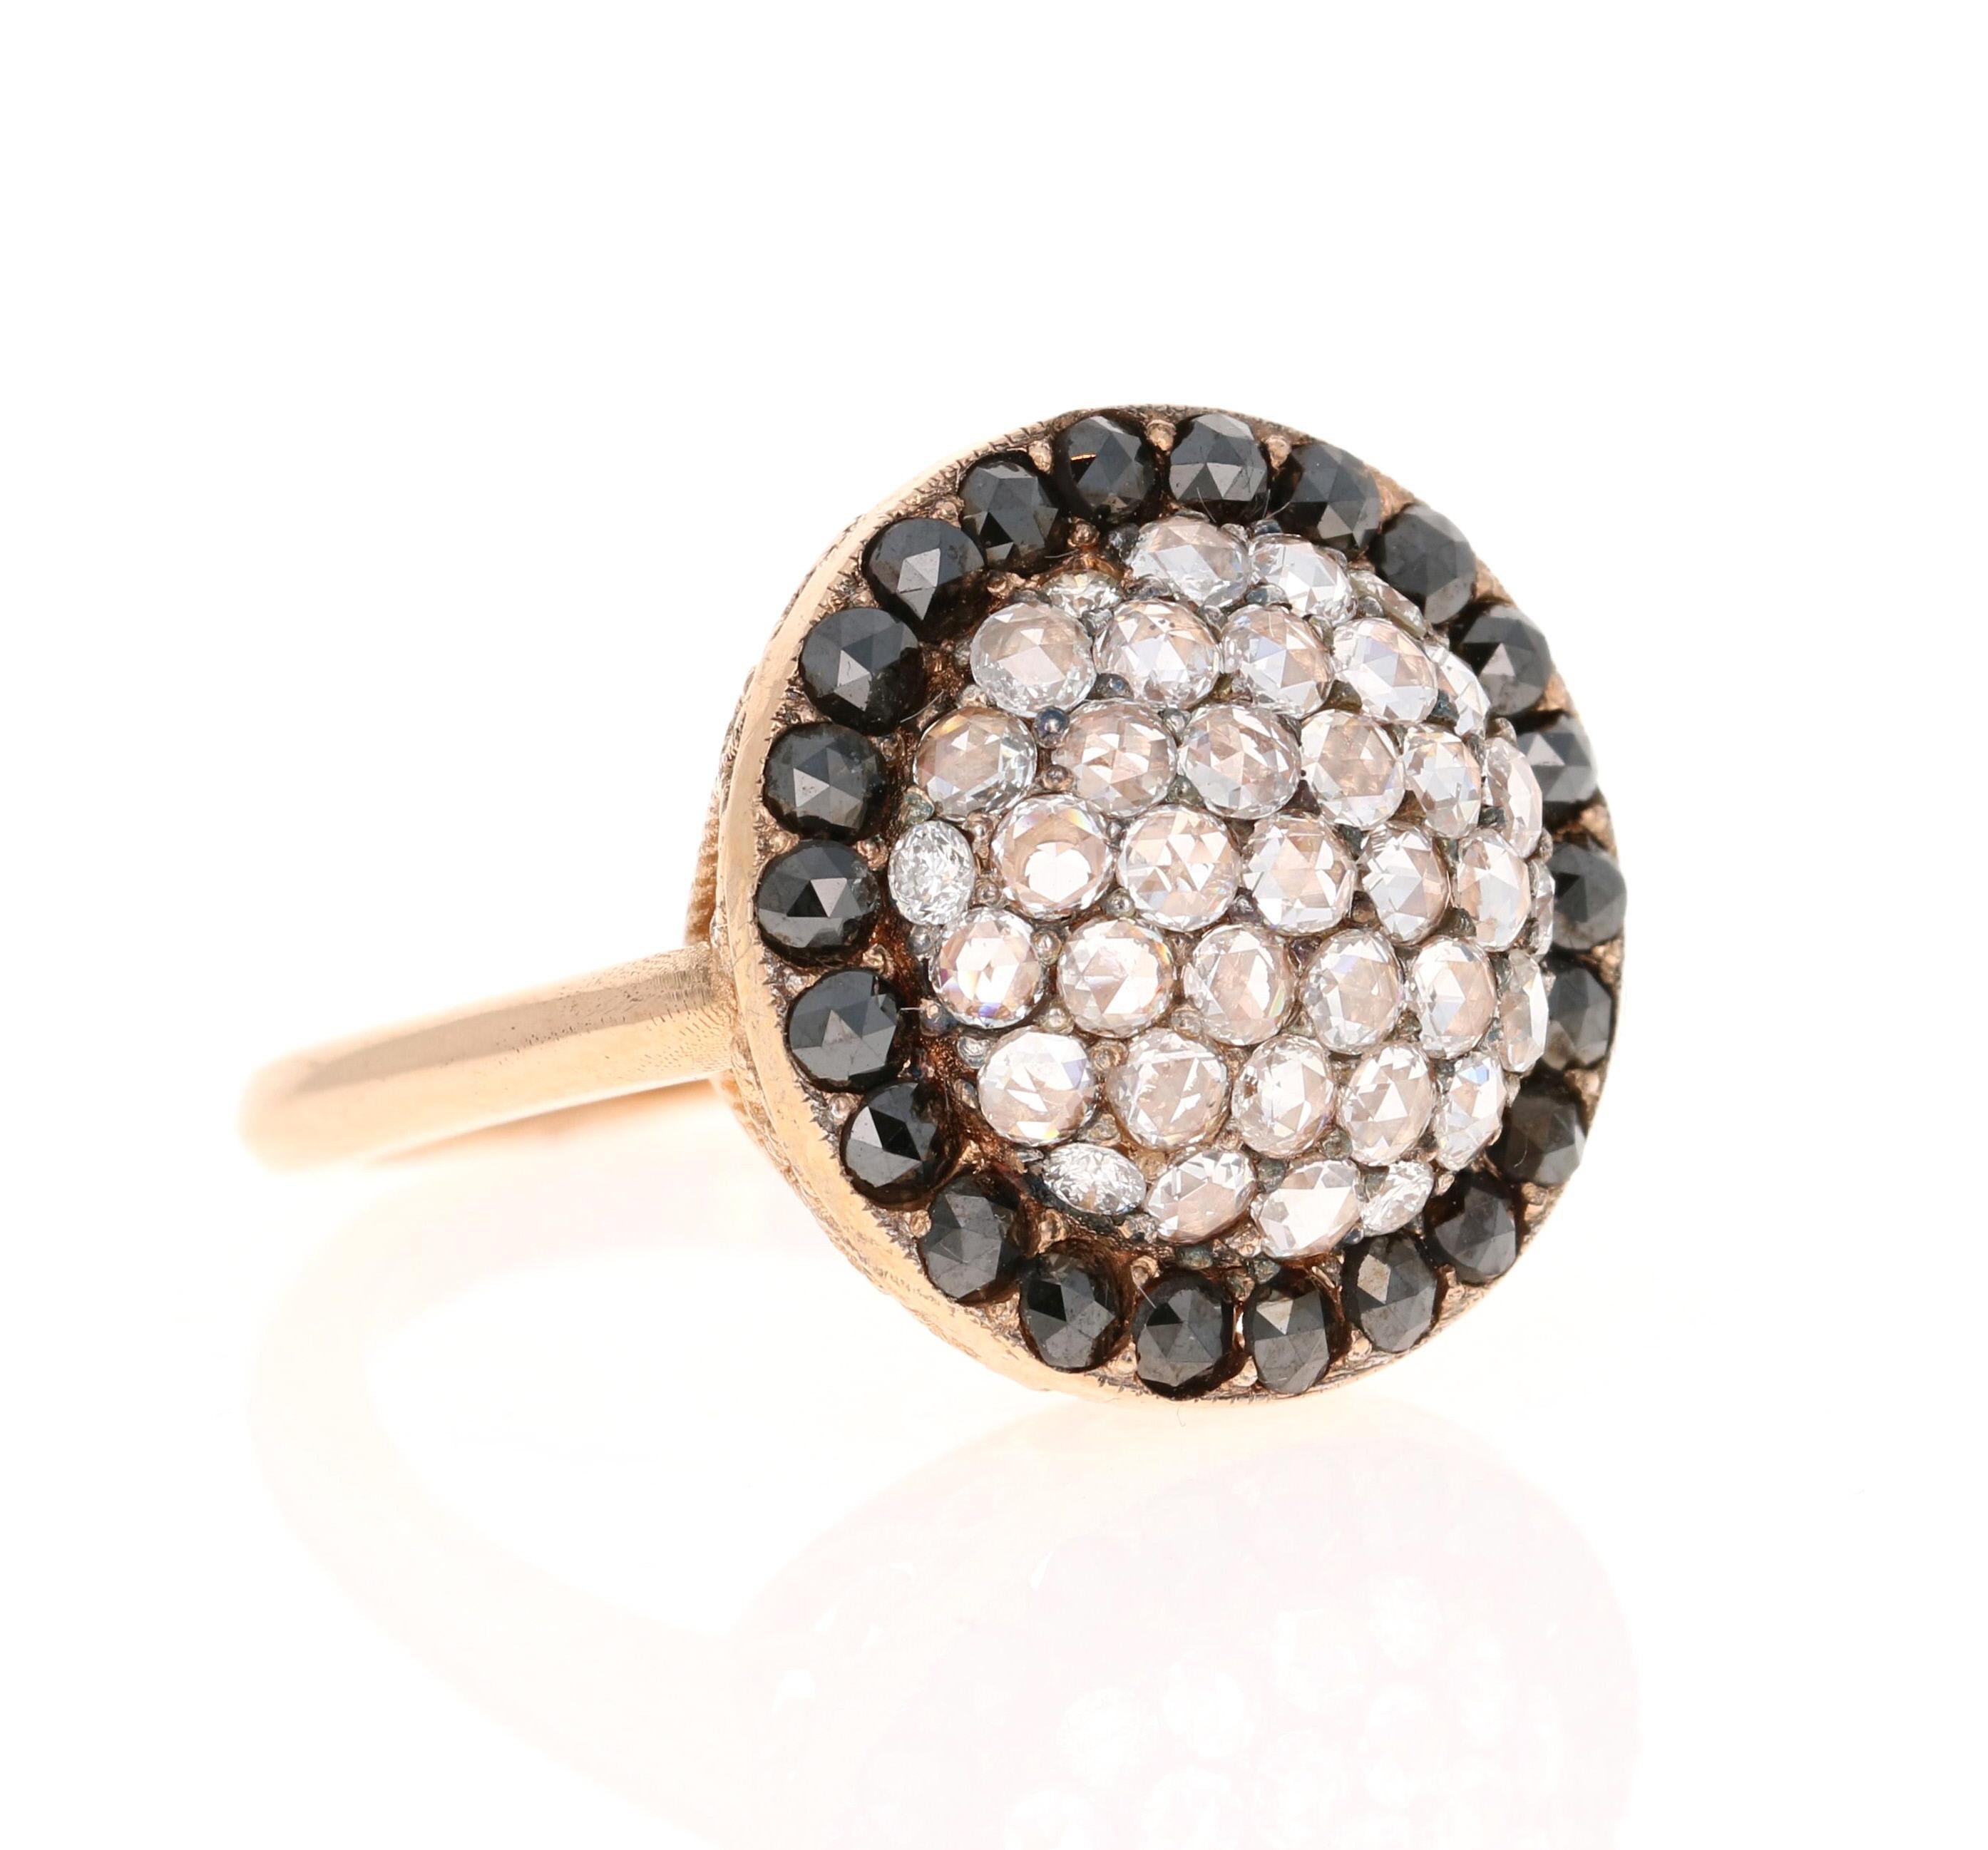 This ring is set with 38 Rose Cut Diamonds that weigh 0.58 carats and is further embellished with 22 Black Diamonds that weigh 0.97 carats. The total carat weight of the ring is 1.55 carats. 

It is beautifully set in 18 Karat Rose Gold and is